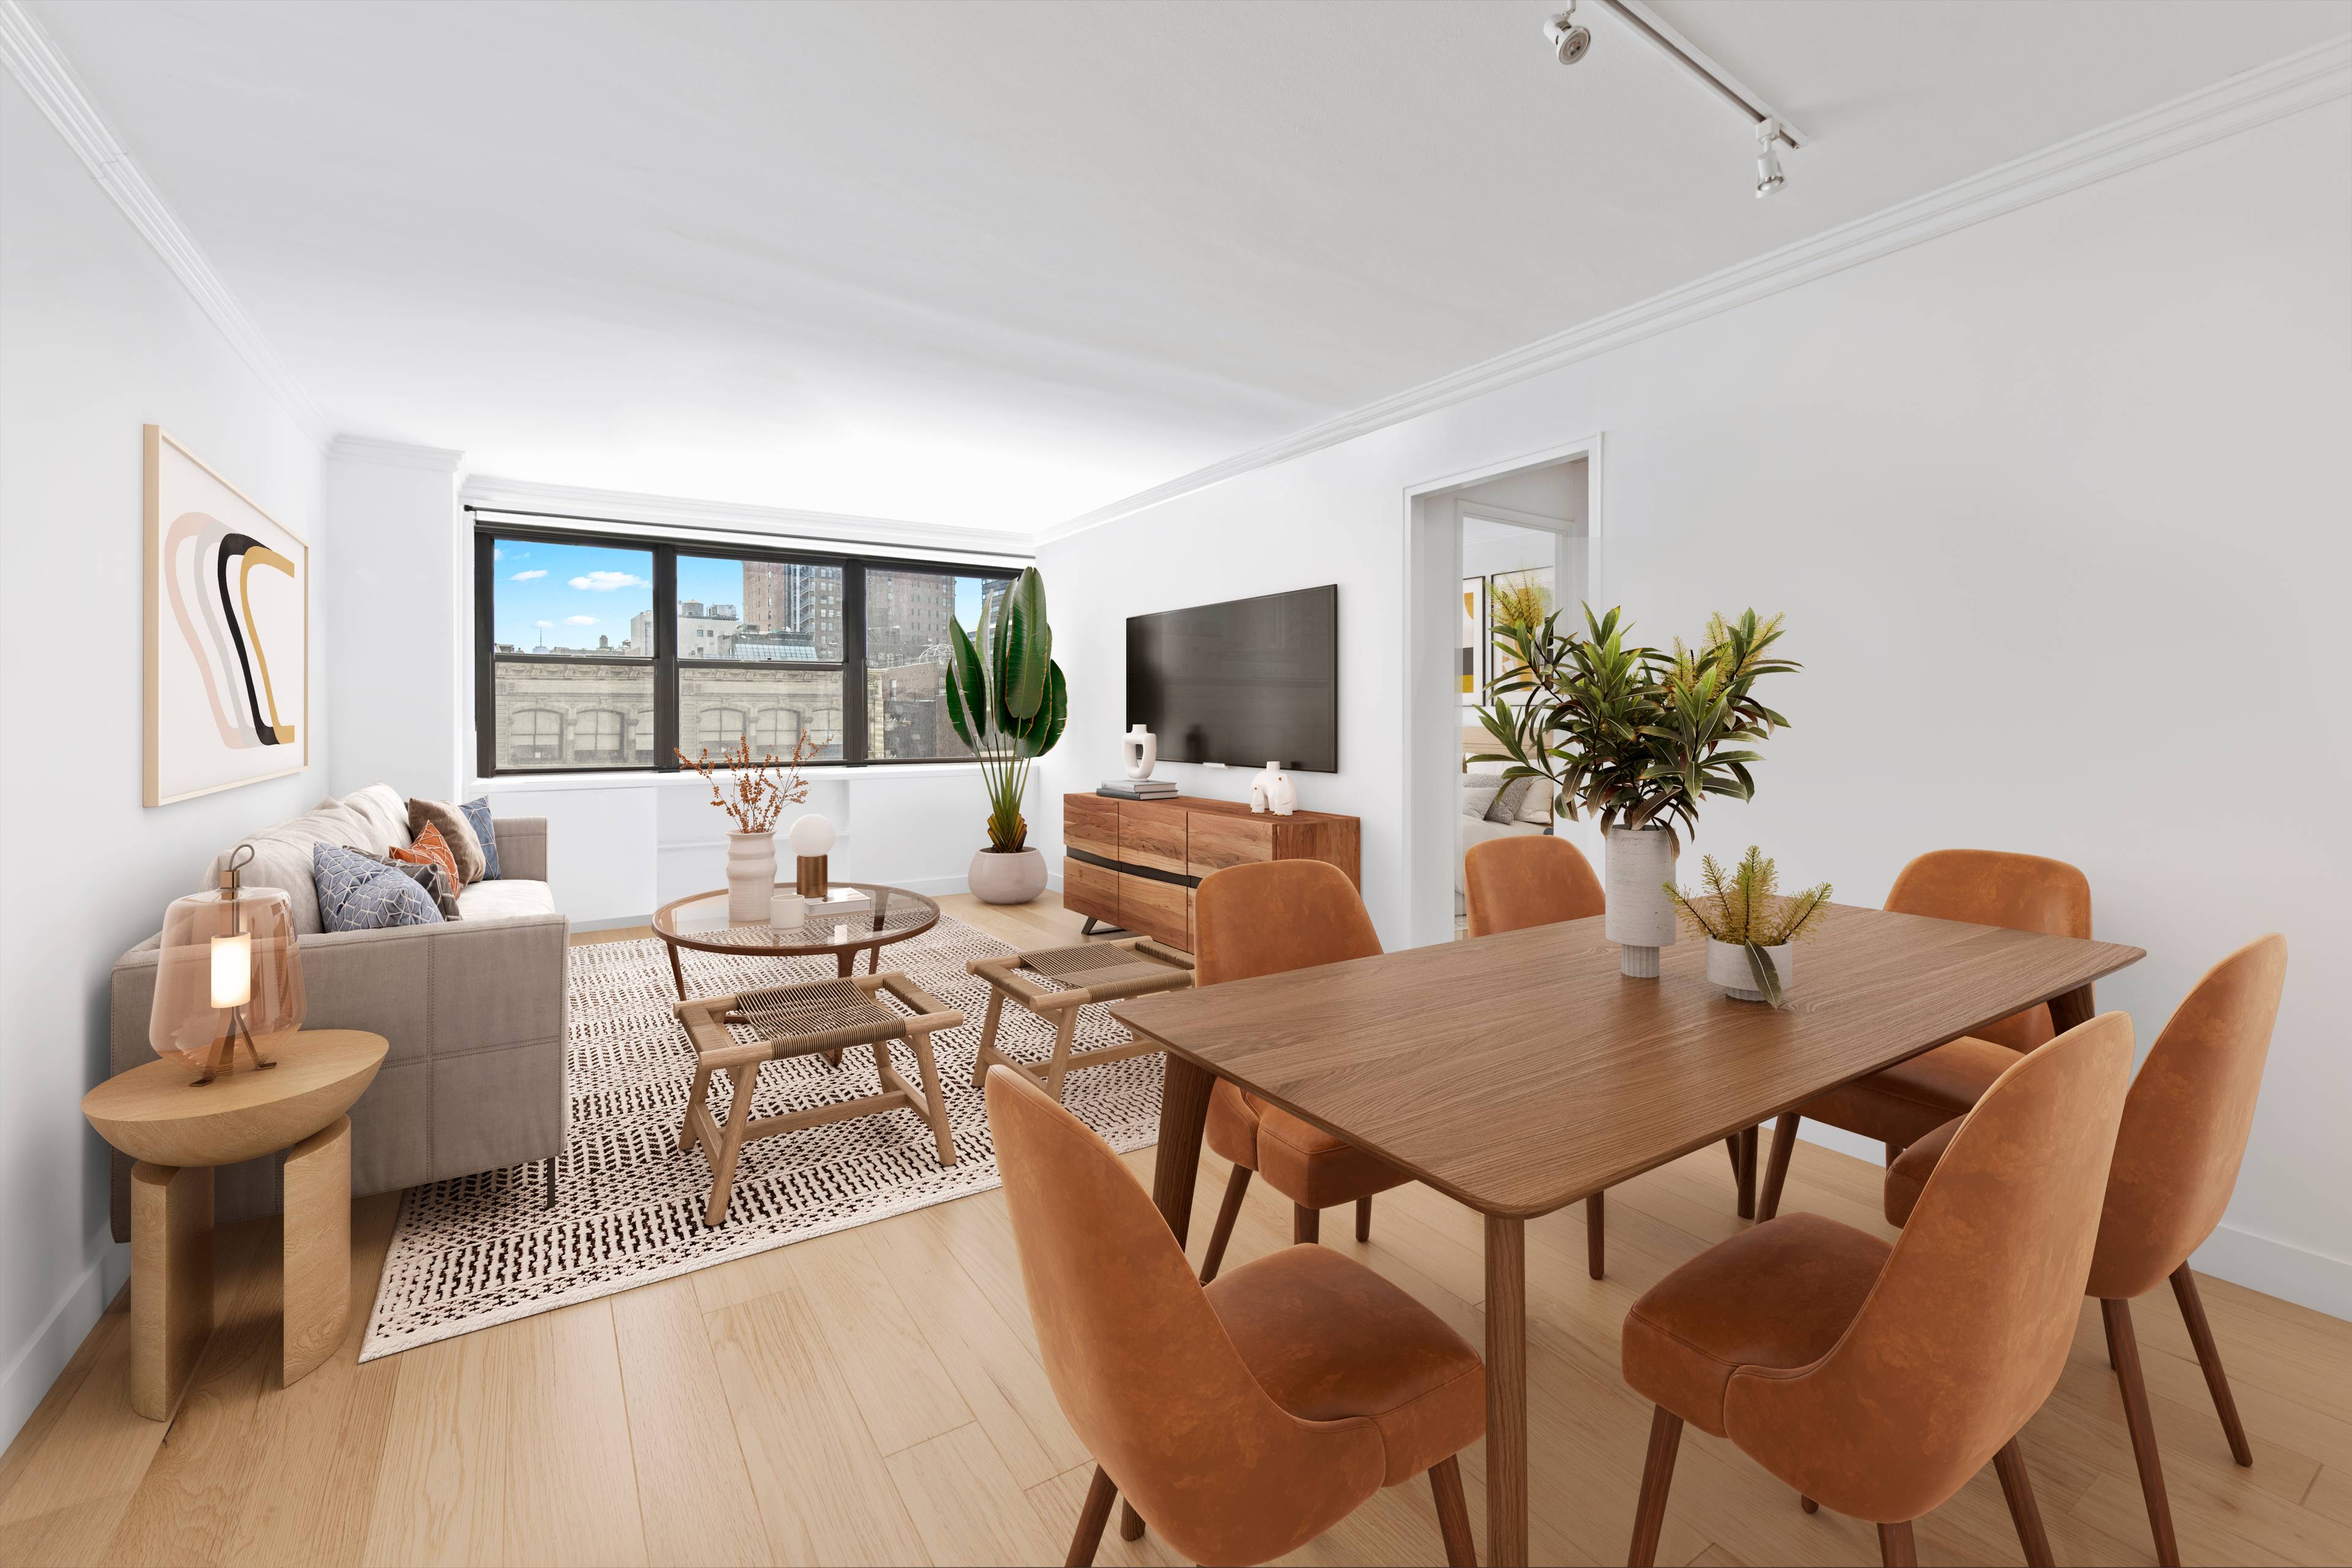 This spacious, sun drenched, and renovated turn key one bedroom residence has everything you need for great quality of life in the heart of coveted Union Square.